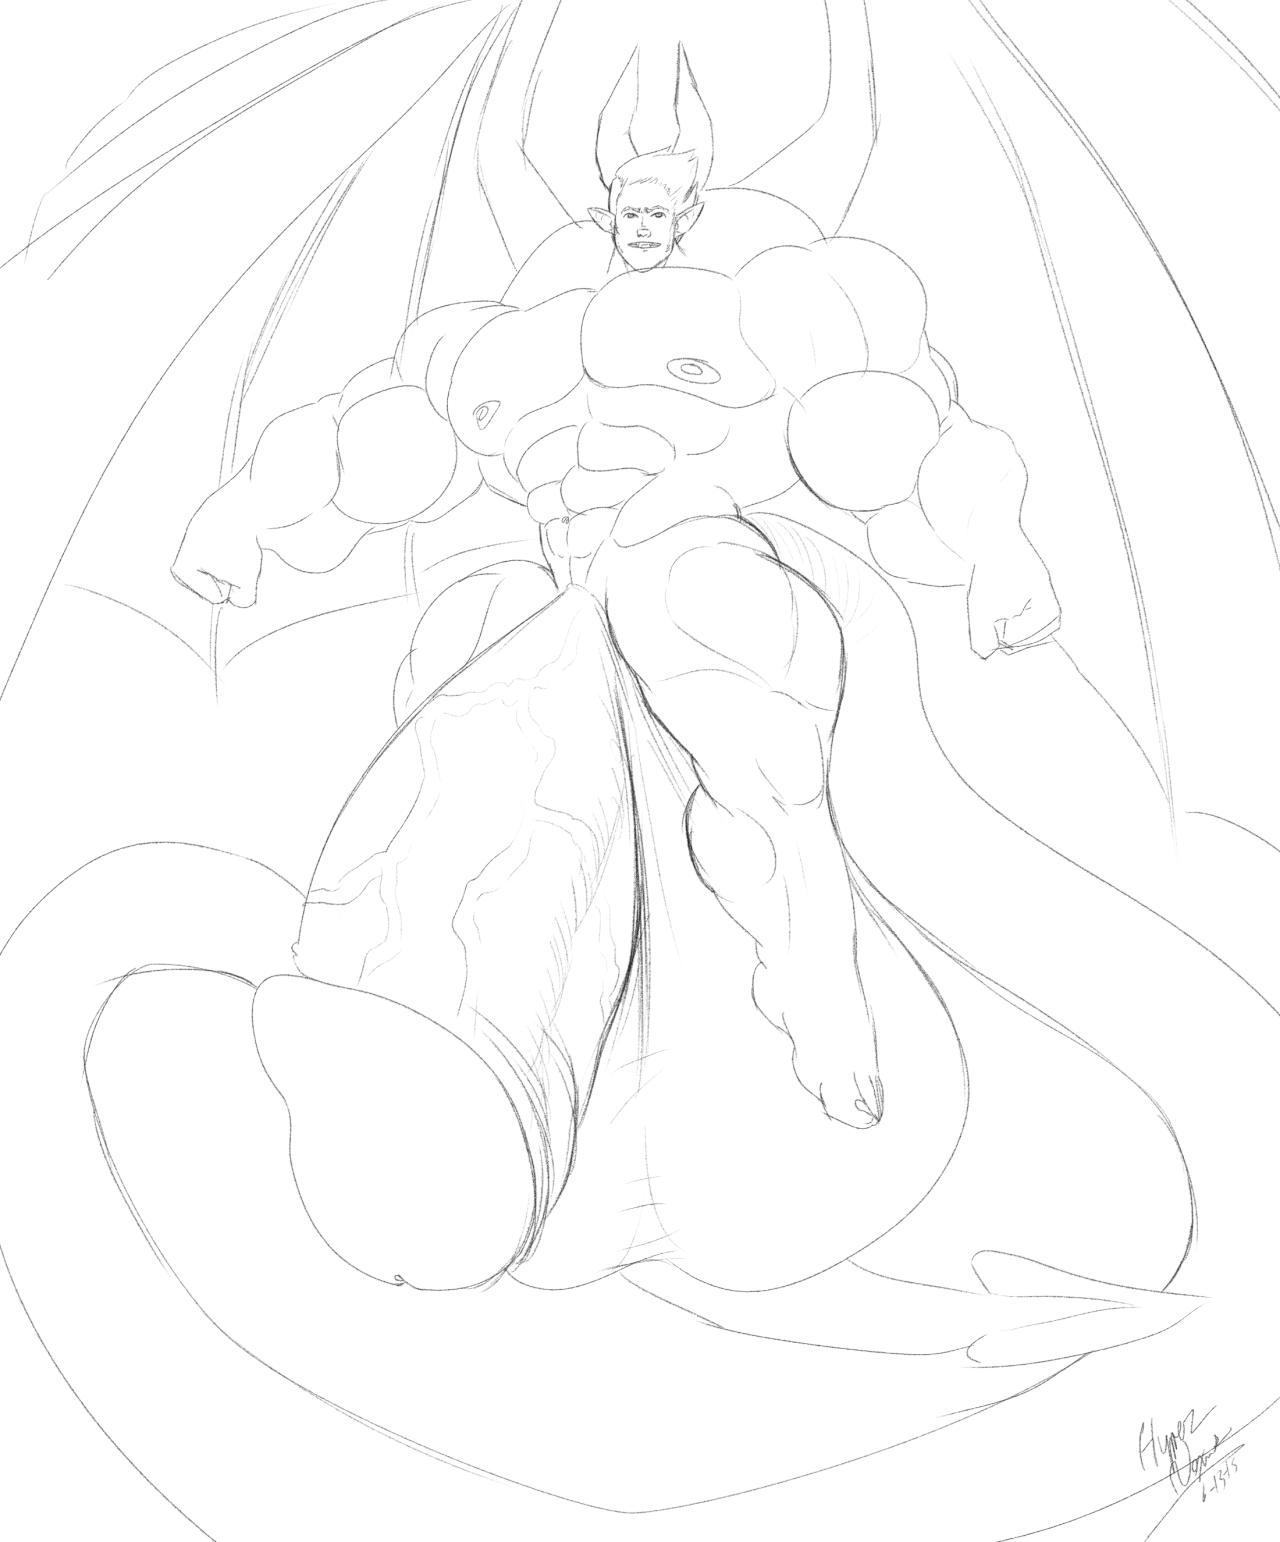 Sketch of a big, muscly incubus dude!ForÂ caffeinatedomniplex, who was the first